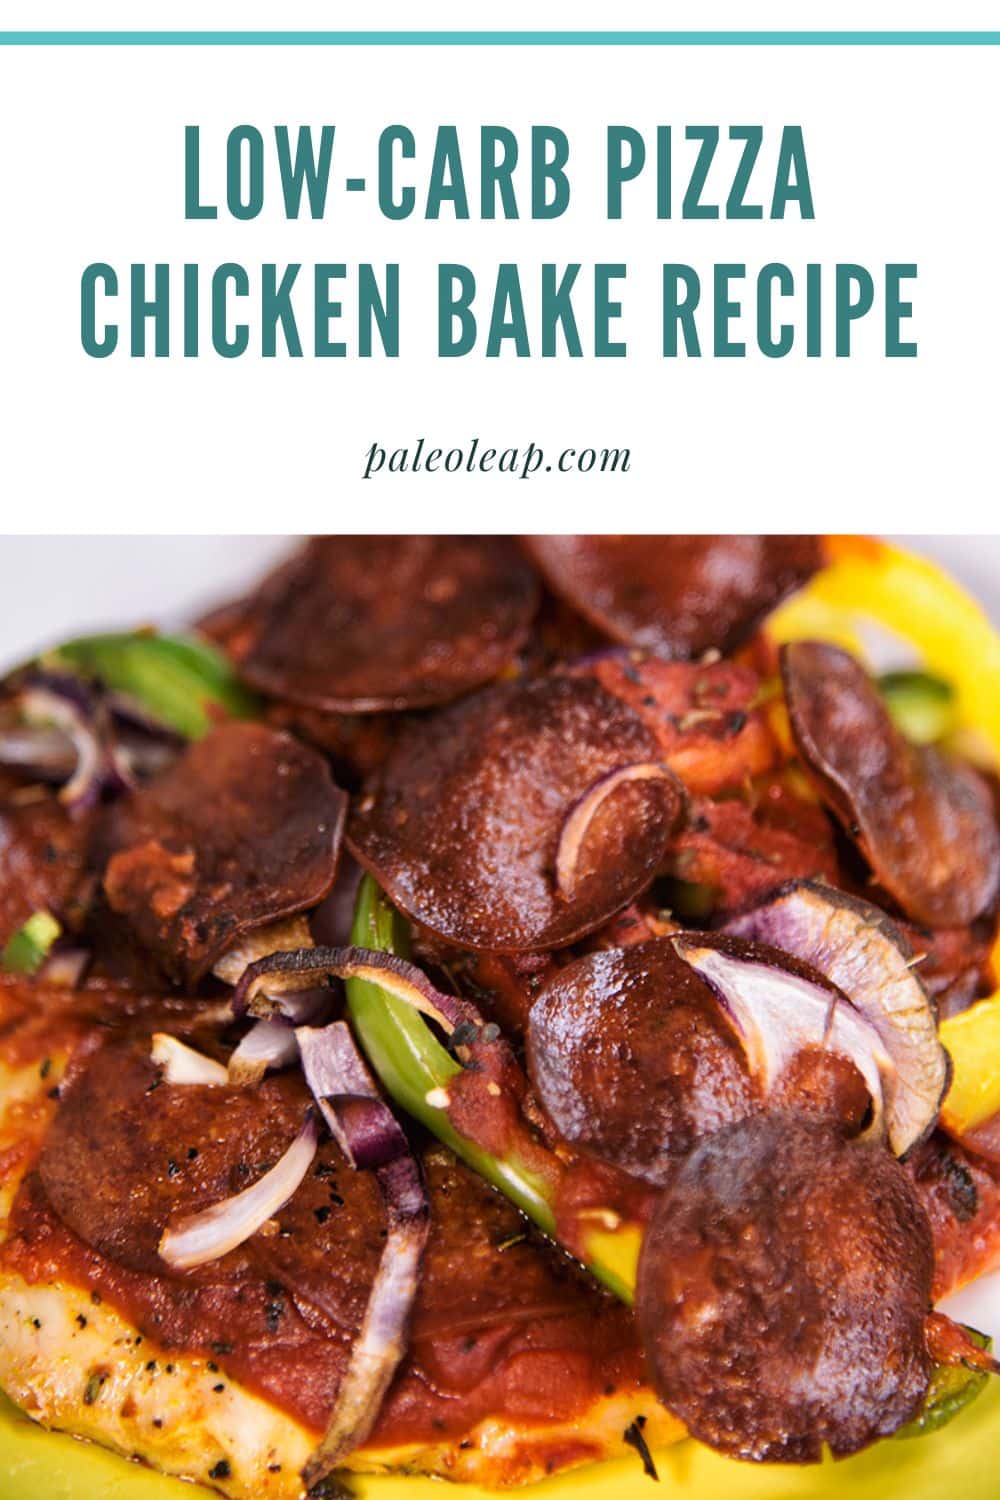 Low-Carb Pizza Chicken Bake Recipe | Paleo Leap